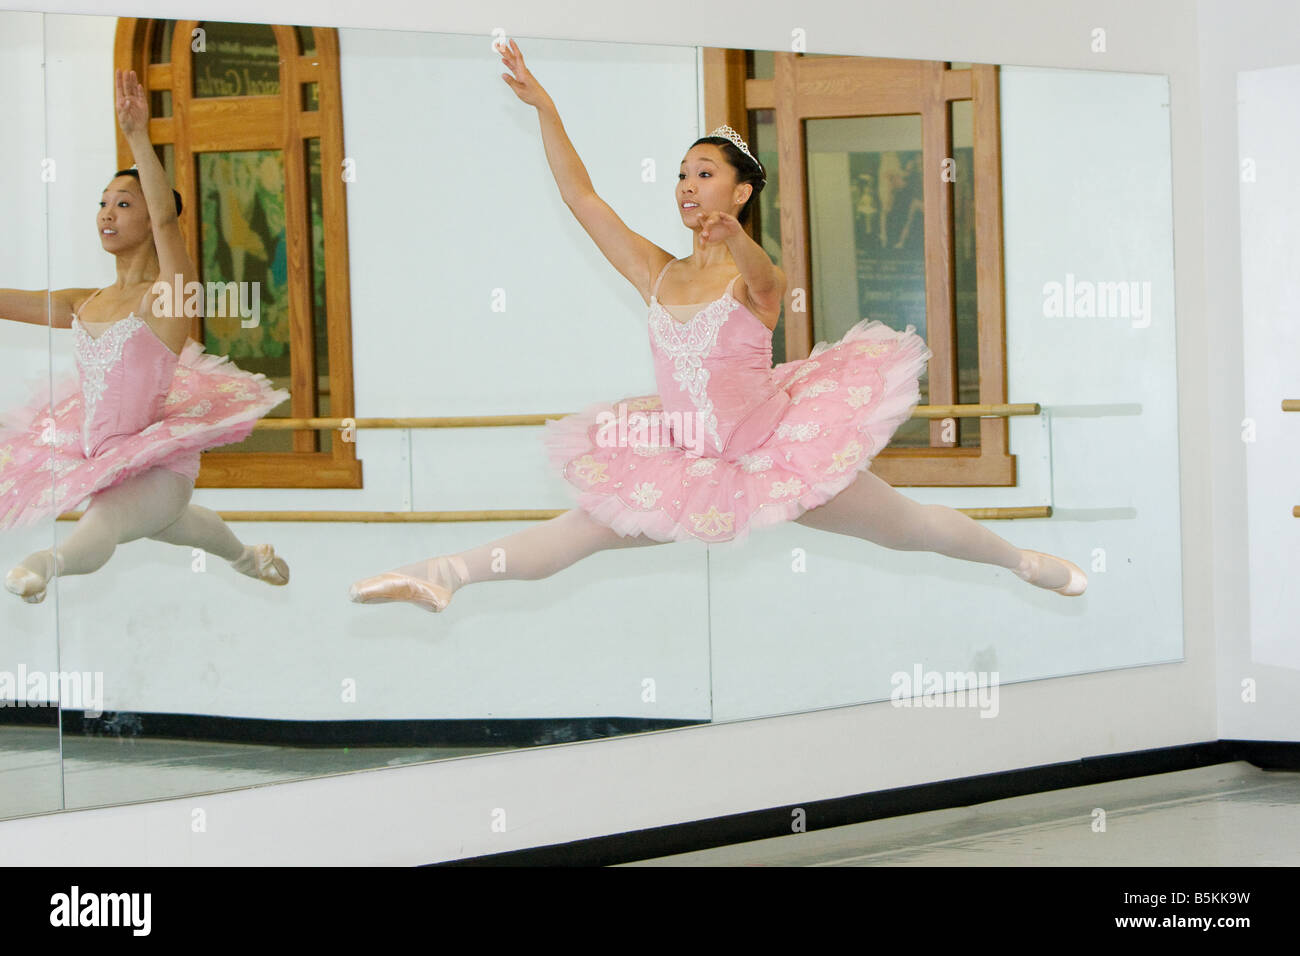 A ballerina a jumping through the air in front of a mirror Stock Photo - Alamy